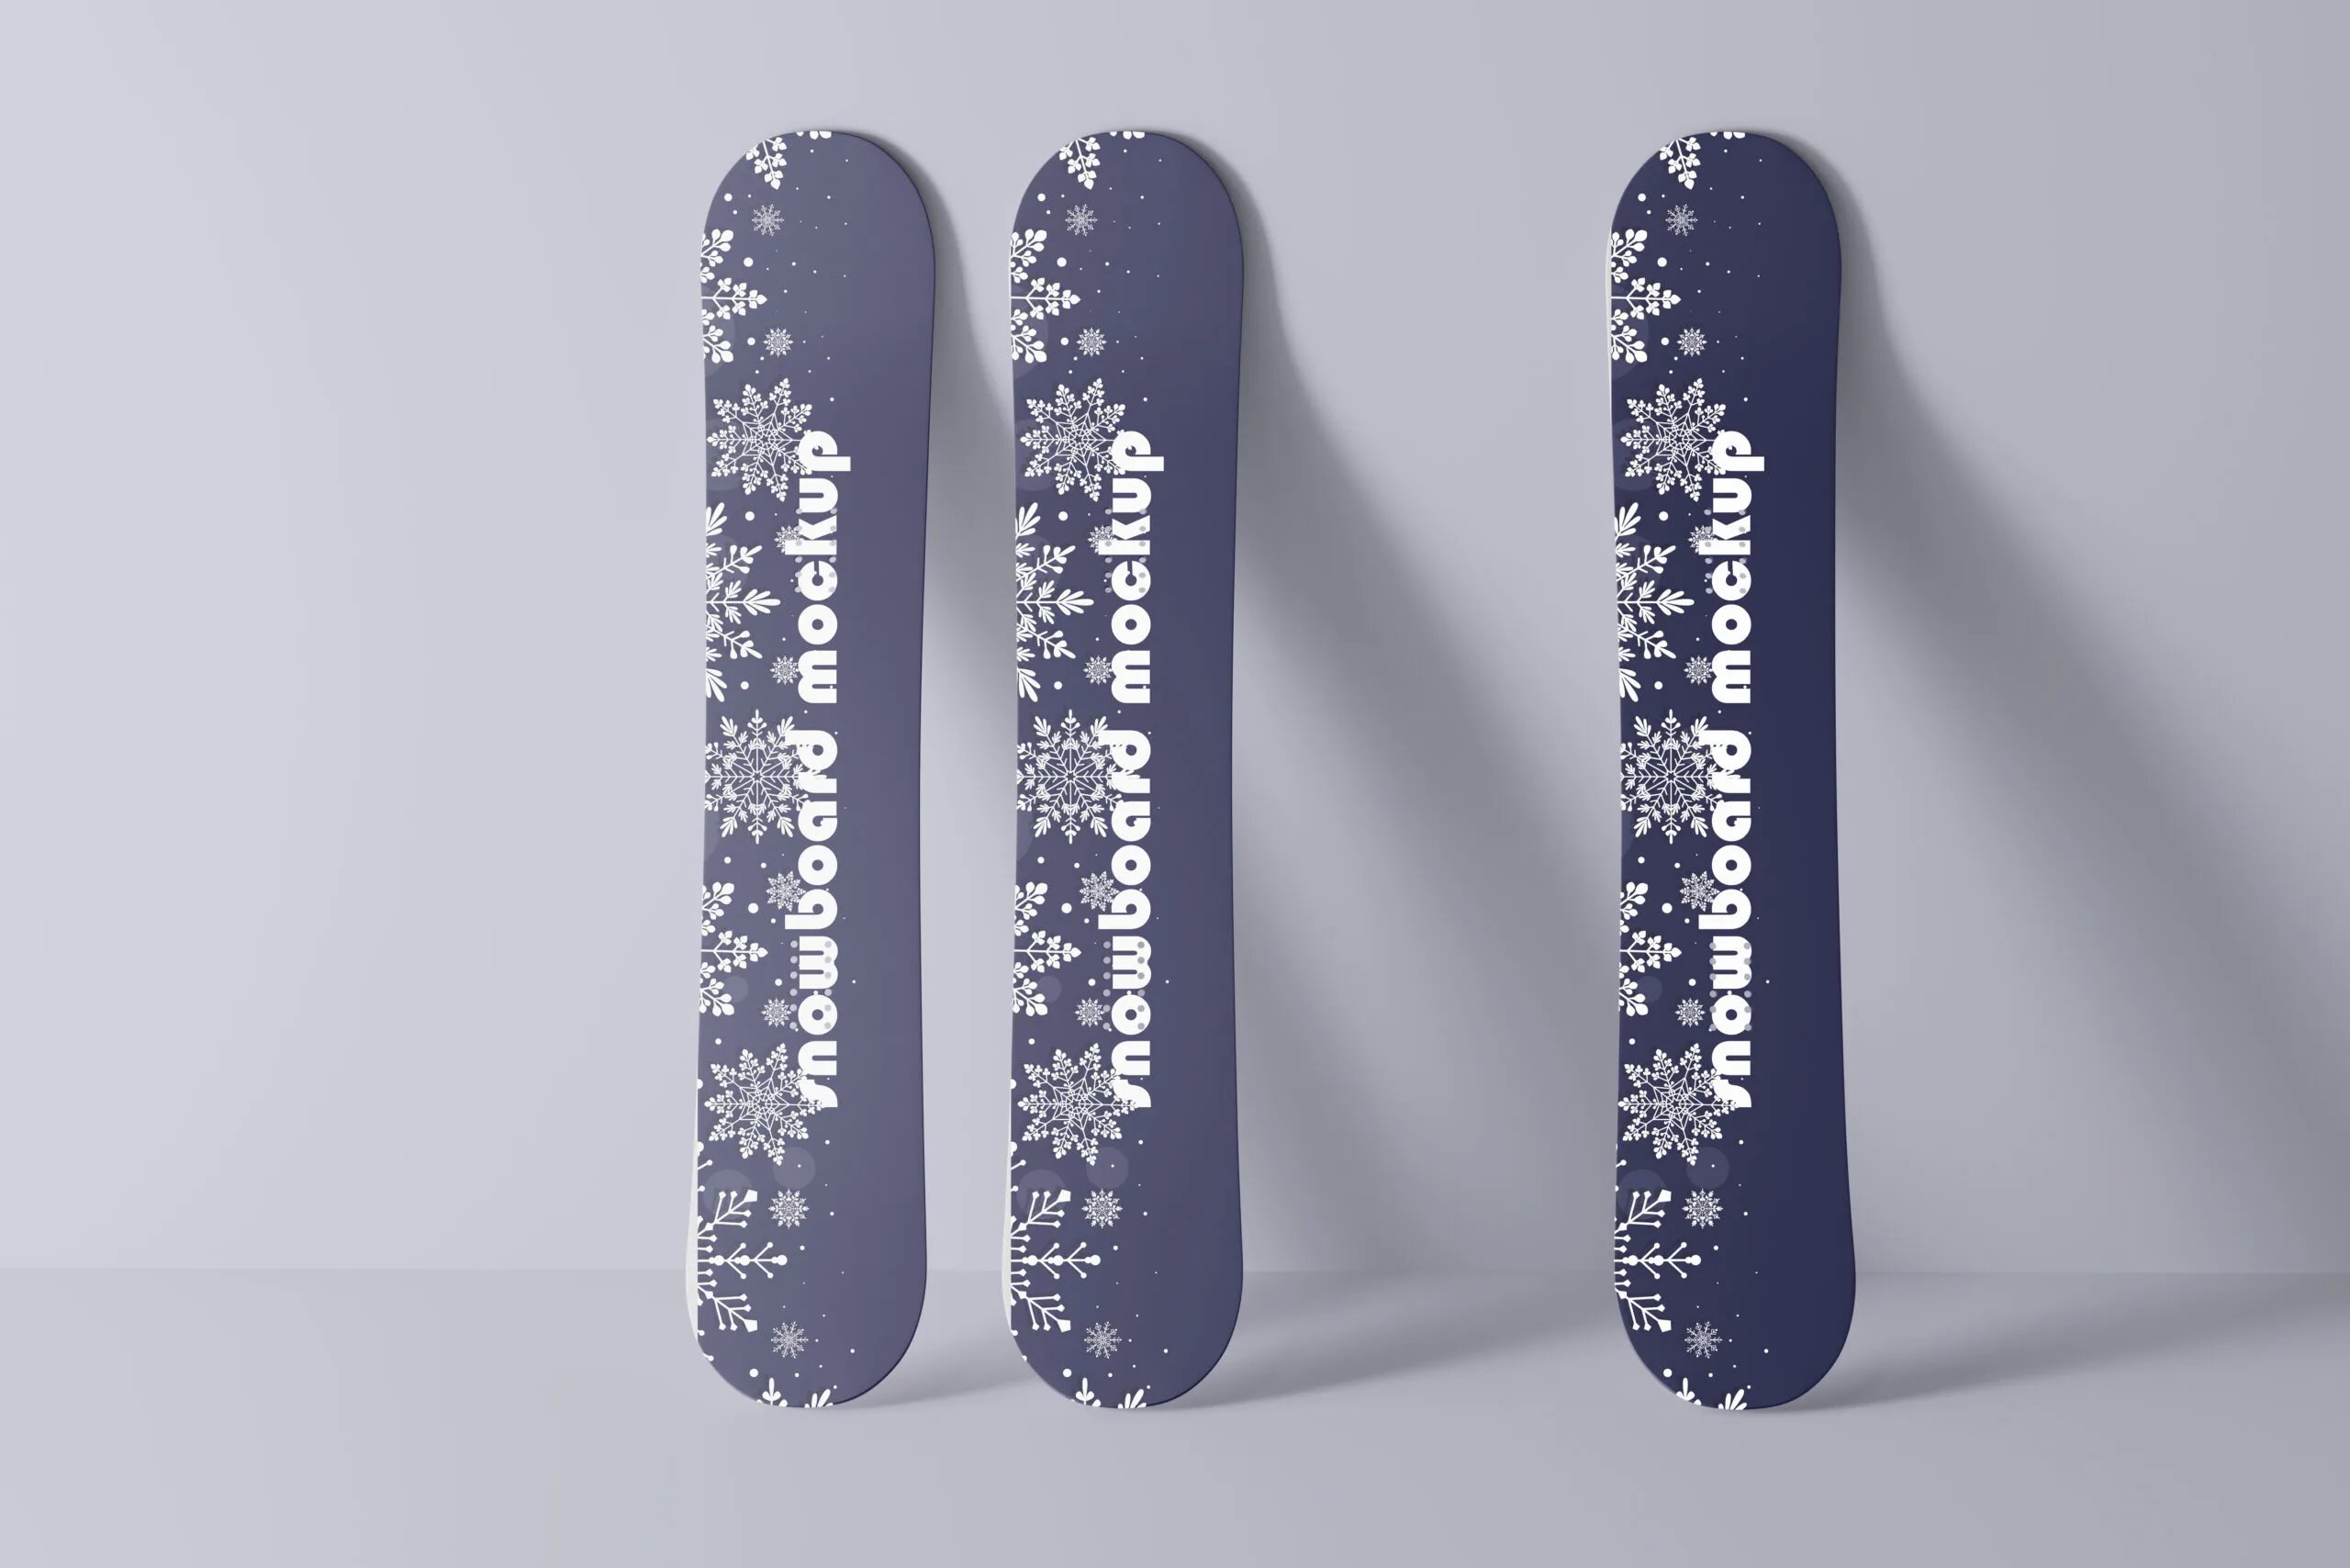 10 Snowboards Mockups in Different Sights FREE PSD